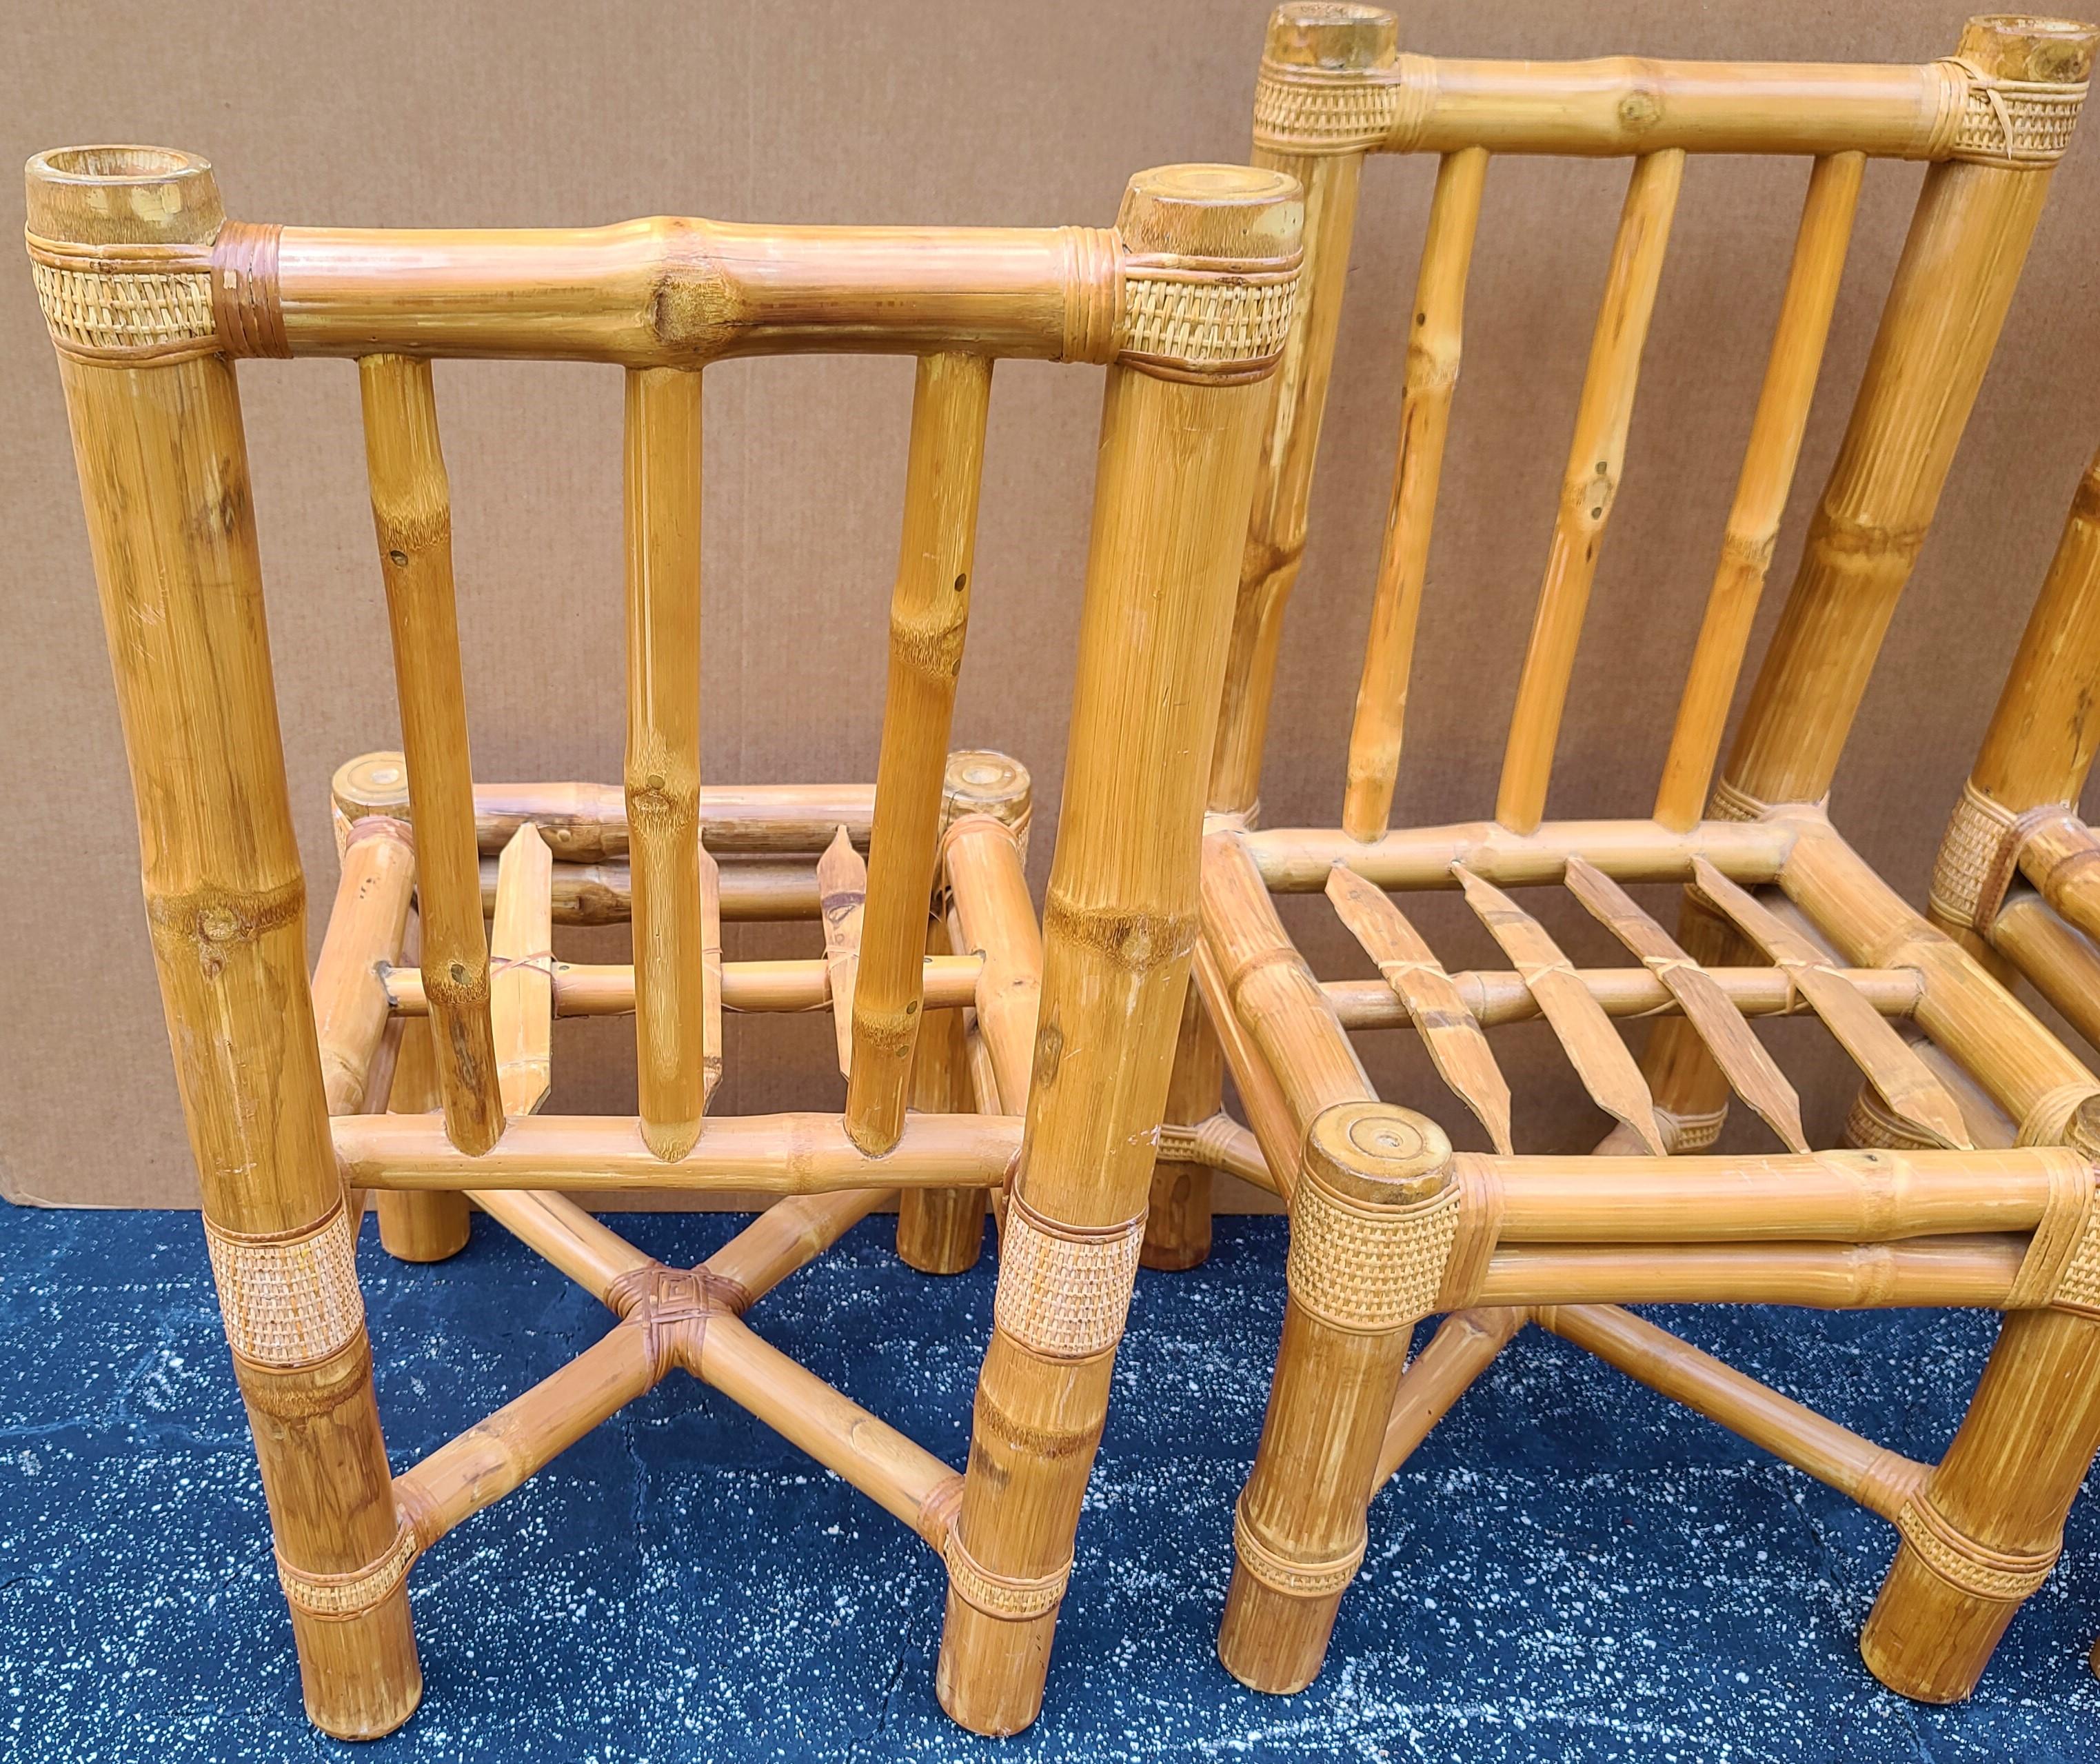 Late 20th Century Vintage Elephant Bamboo Rattan Dining Chairs with Cushions - Set of 6 For Sale